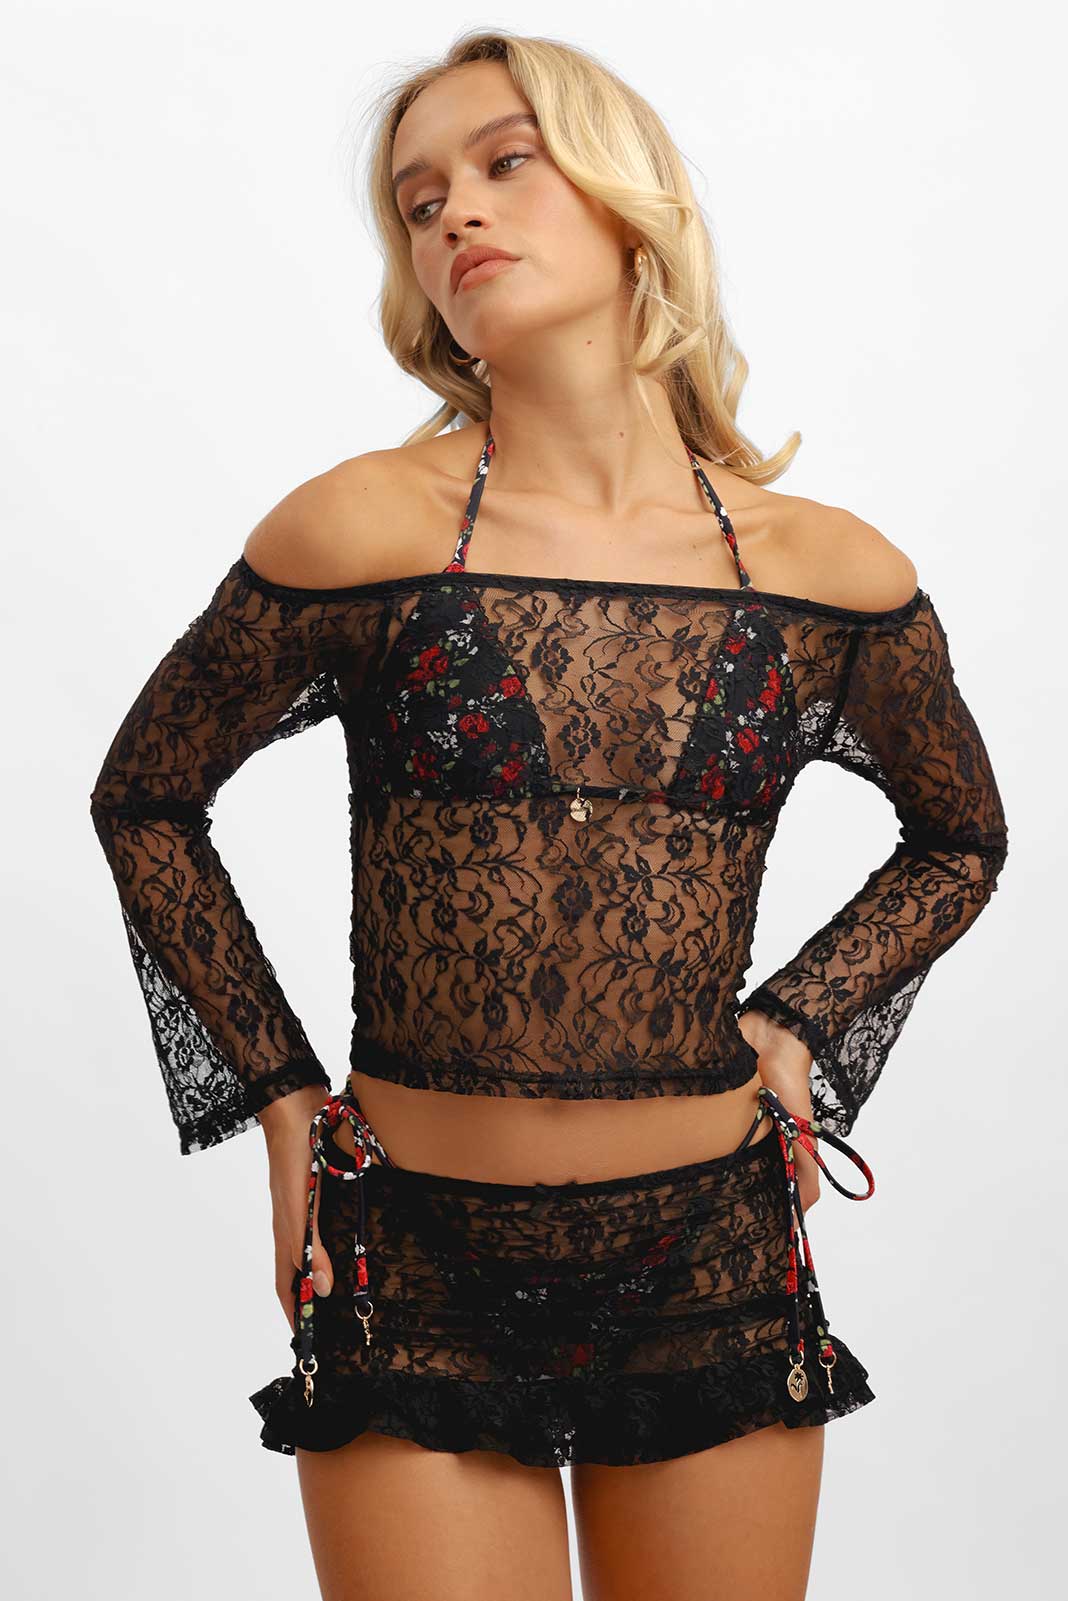 Diana Long-Sleeve Top / Black Lace